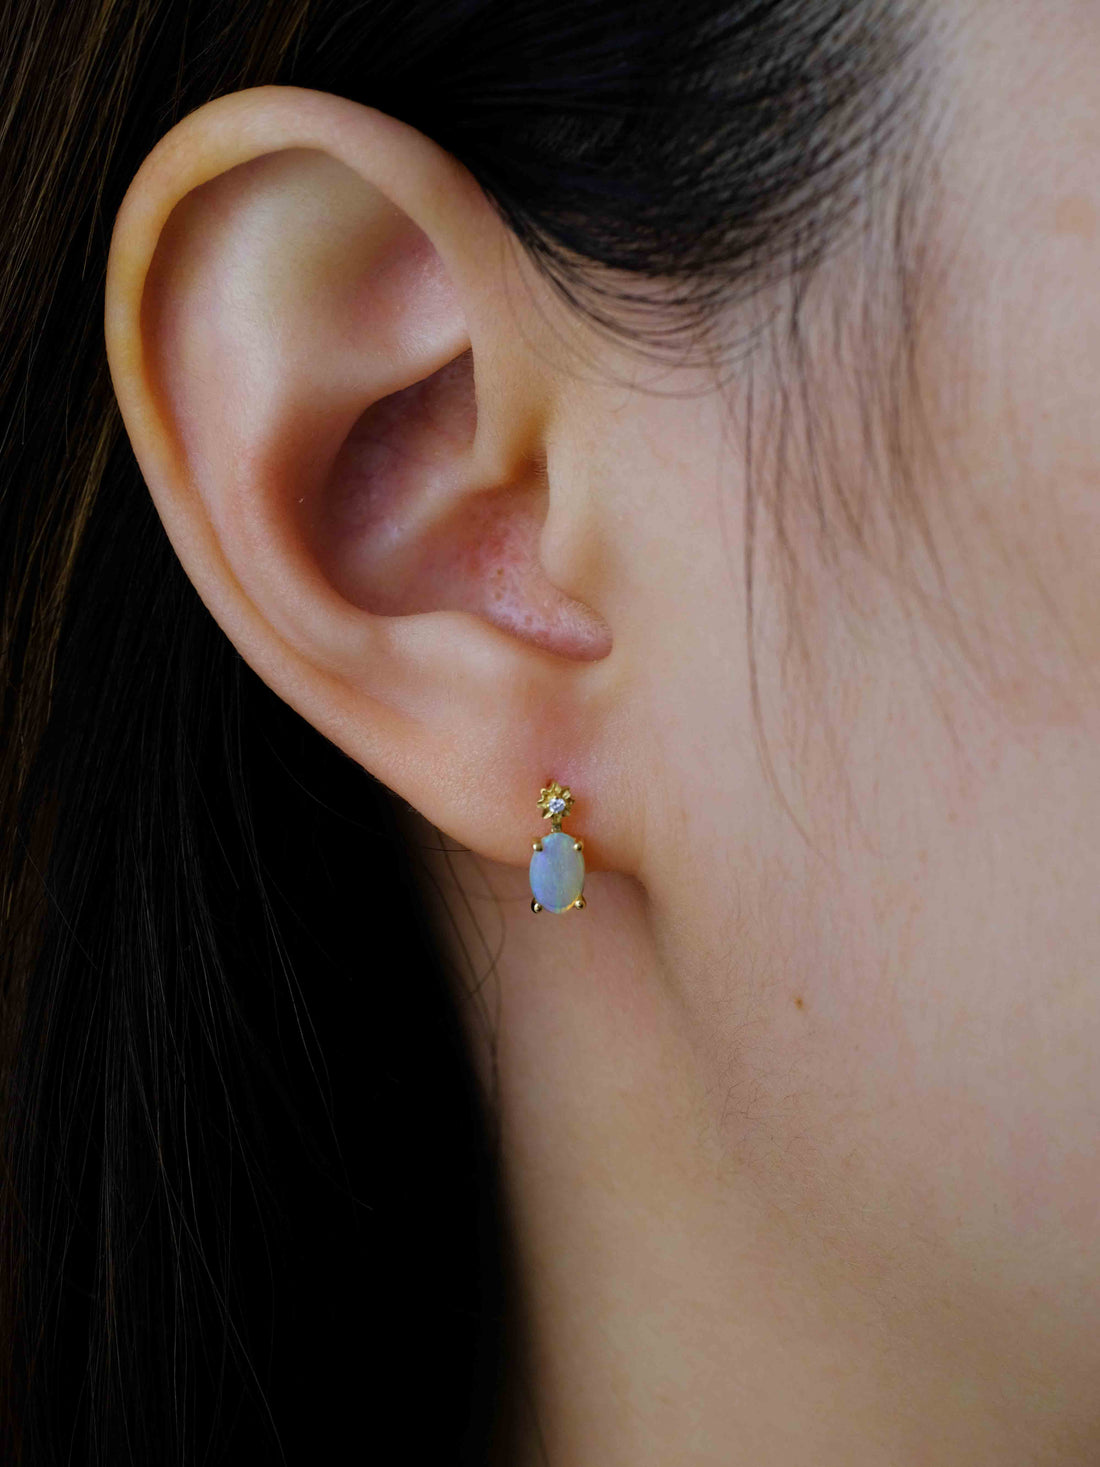 Oval Opal and Diamond Earrings, 18k solid gold